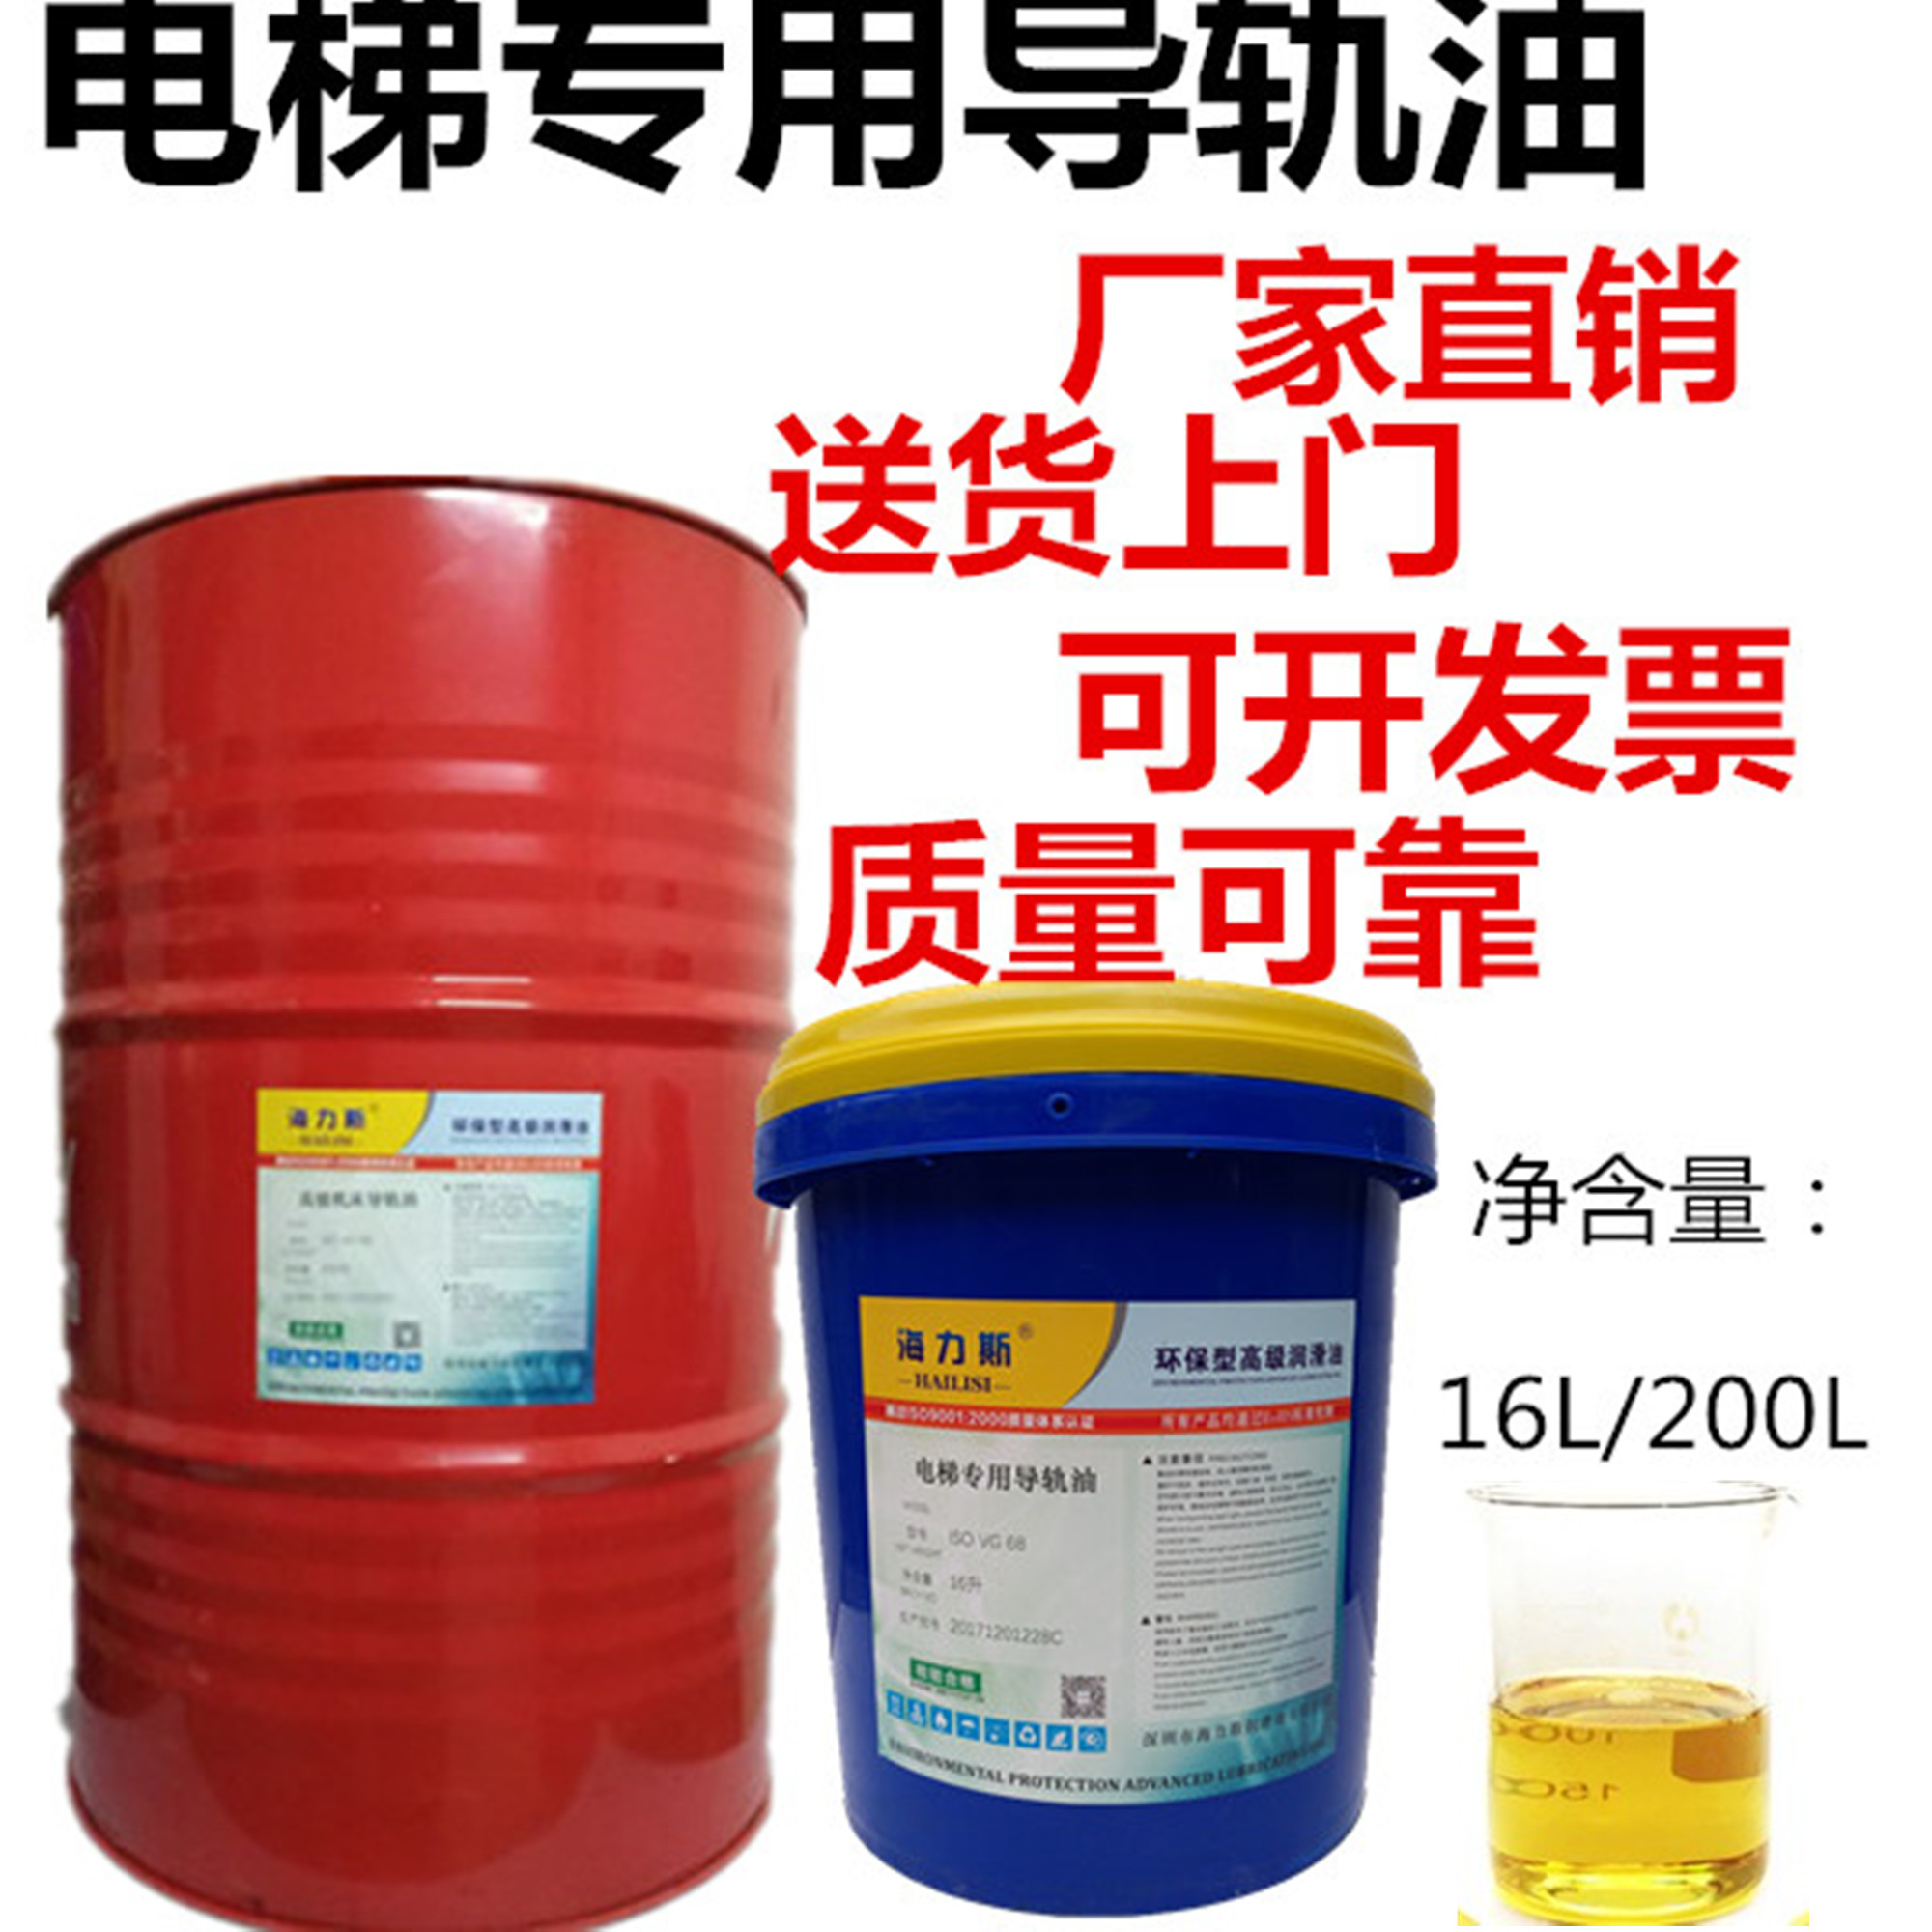 Elevator special rail oil No 46 68#100 passenger and cargo elevator special rail lubricating oil 32 anti-wear hydraulic oil 16 liters